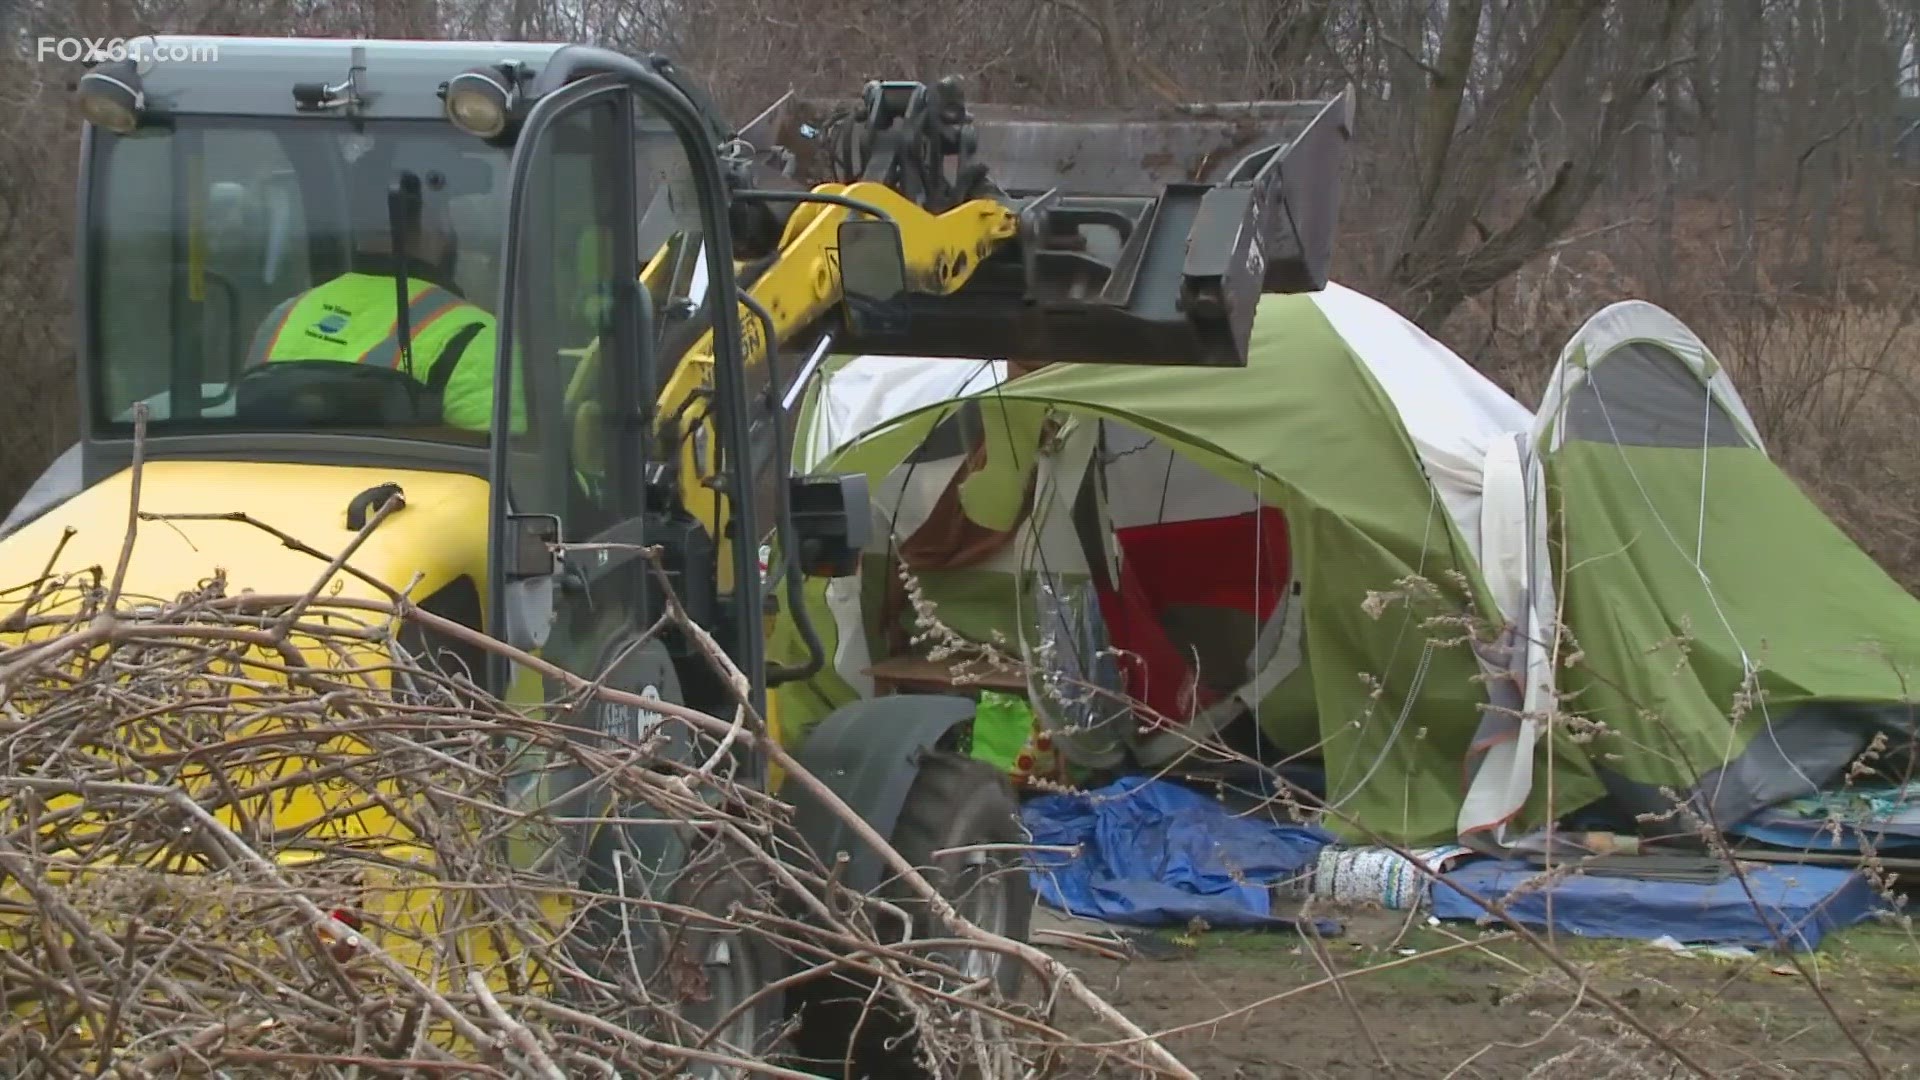 The deadline to leave the encampment was Wedneday as crews came to tear the area apart.